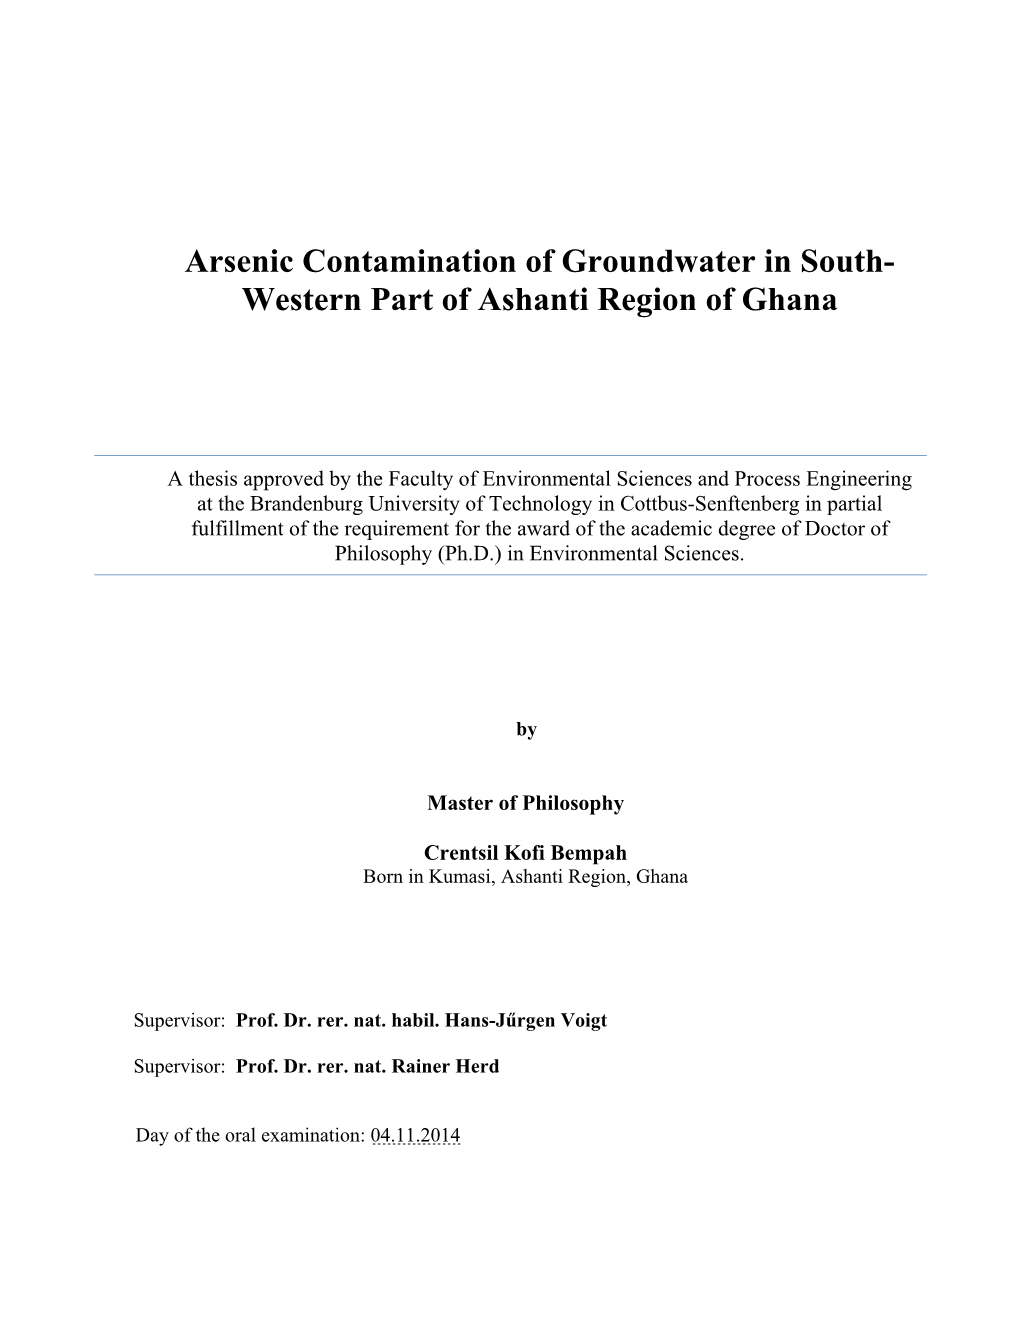 Arsenic Contamination of Groundwater in South- Western Part of Ashanti Region of Ghana